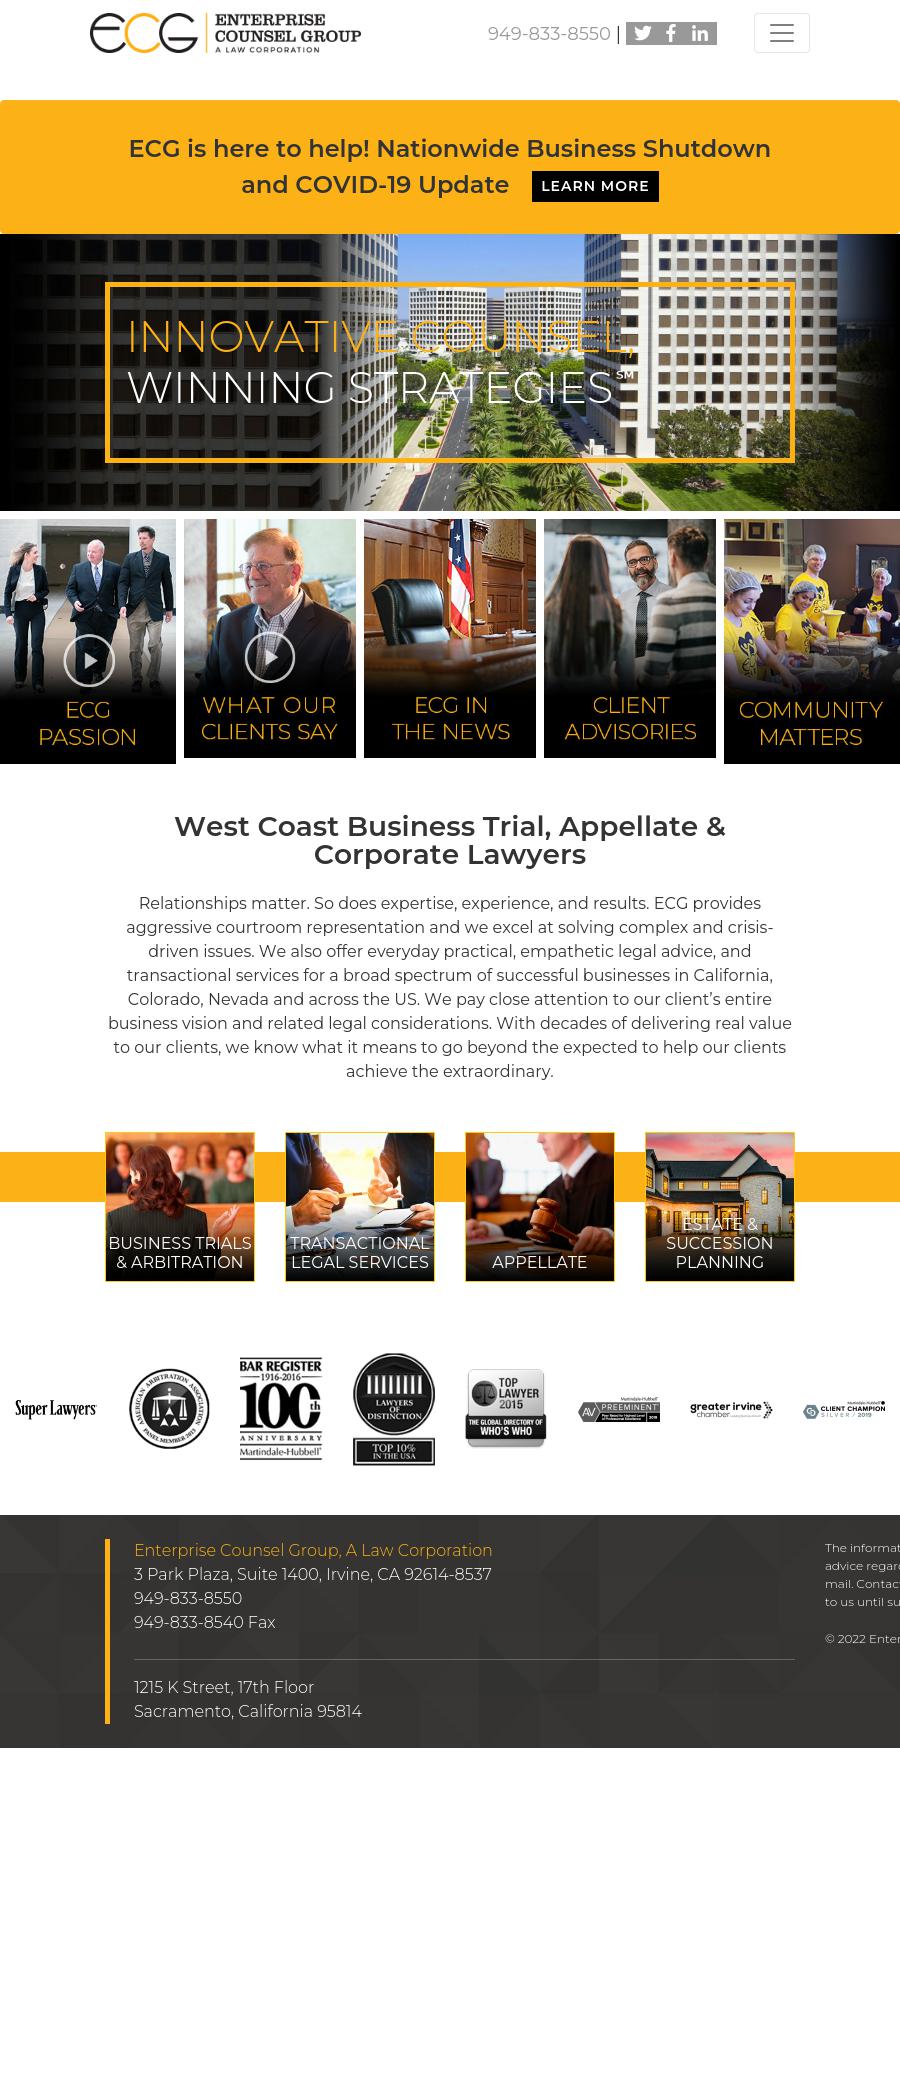 Enterprise Counsel Group, A Law Corporation - Irvine CA Lawyers